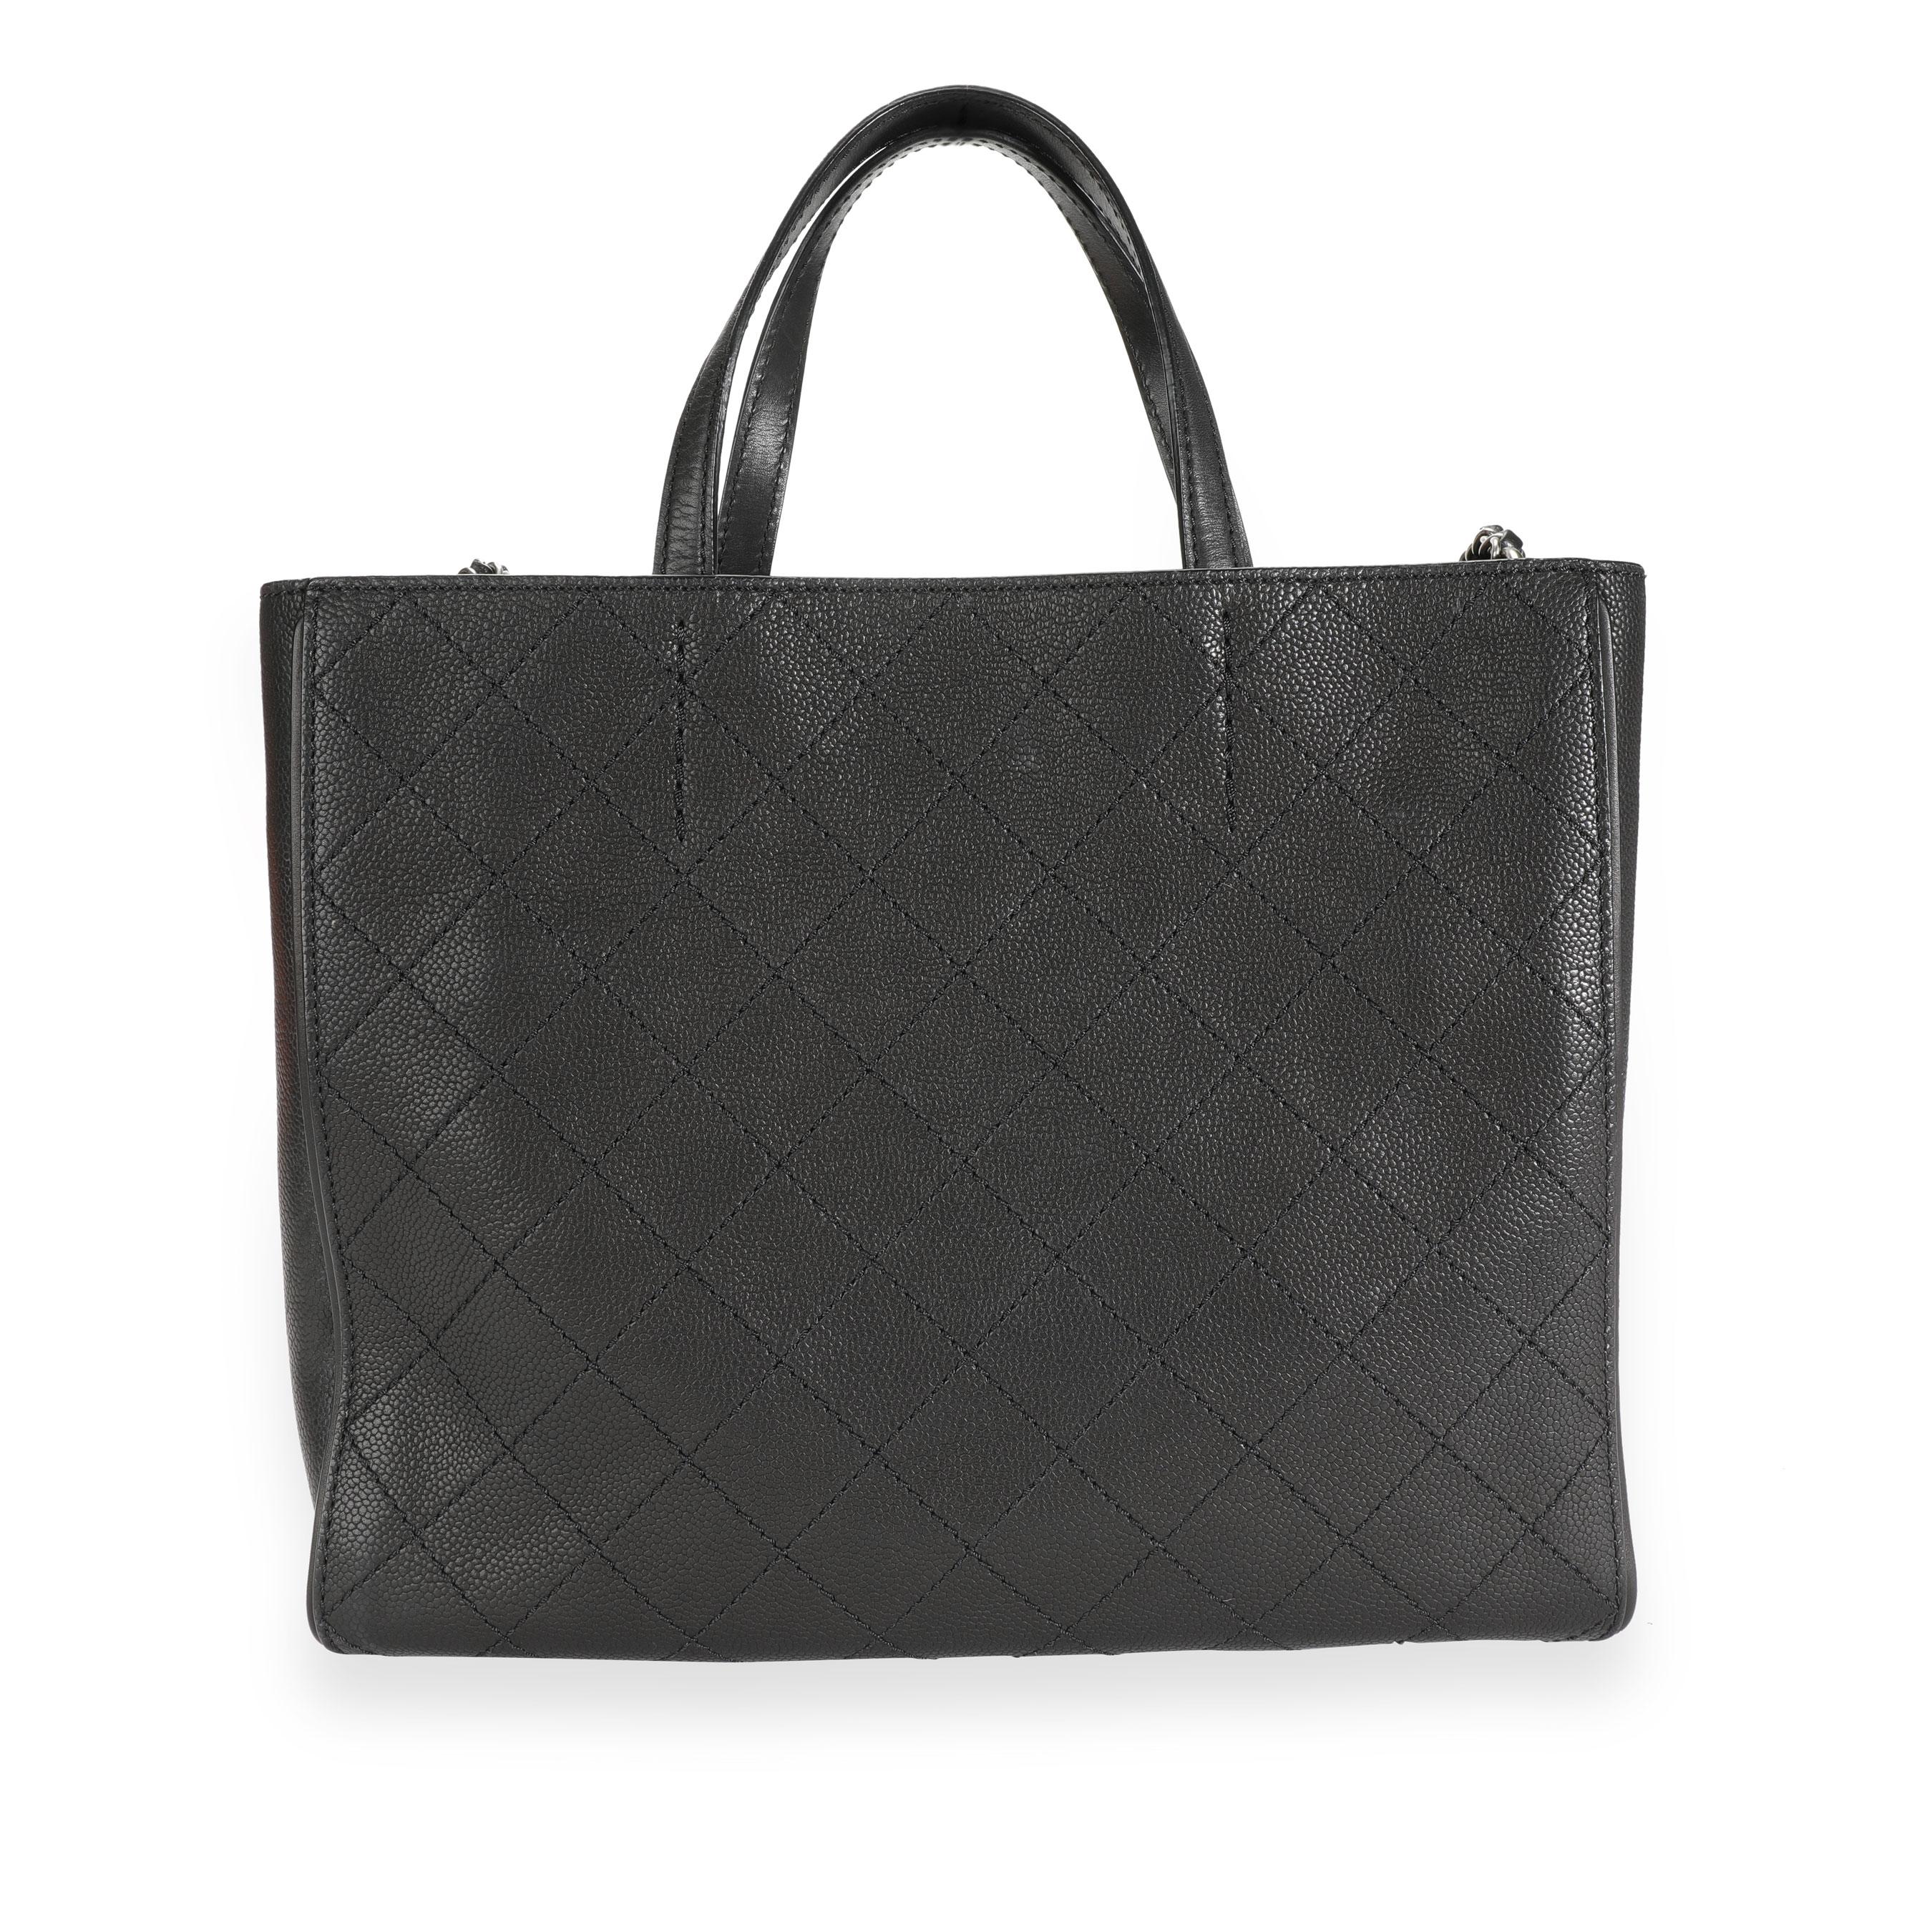 Chanel Black Stitched Grained Calfskin Hamptons Tote 2